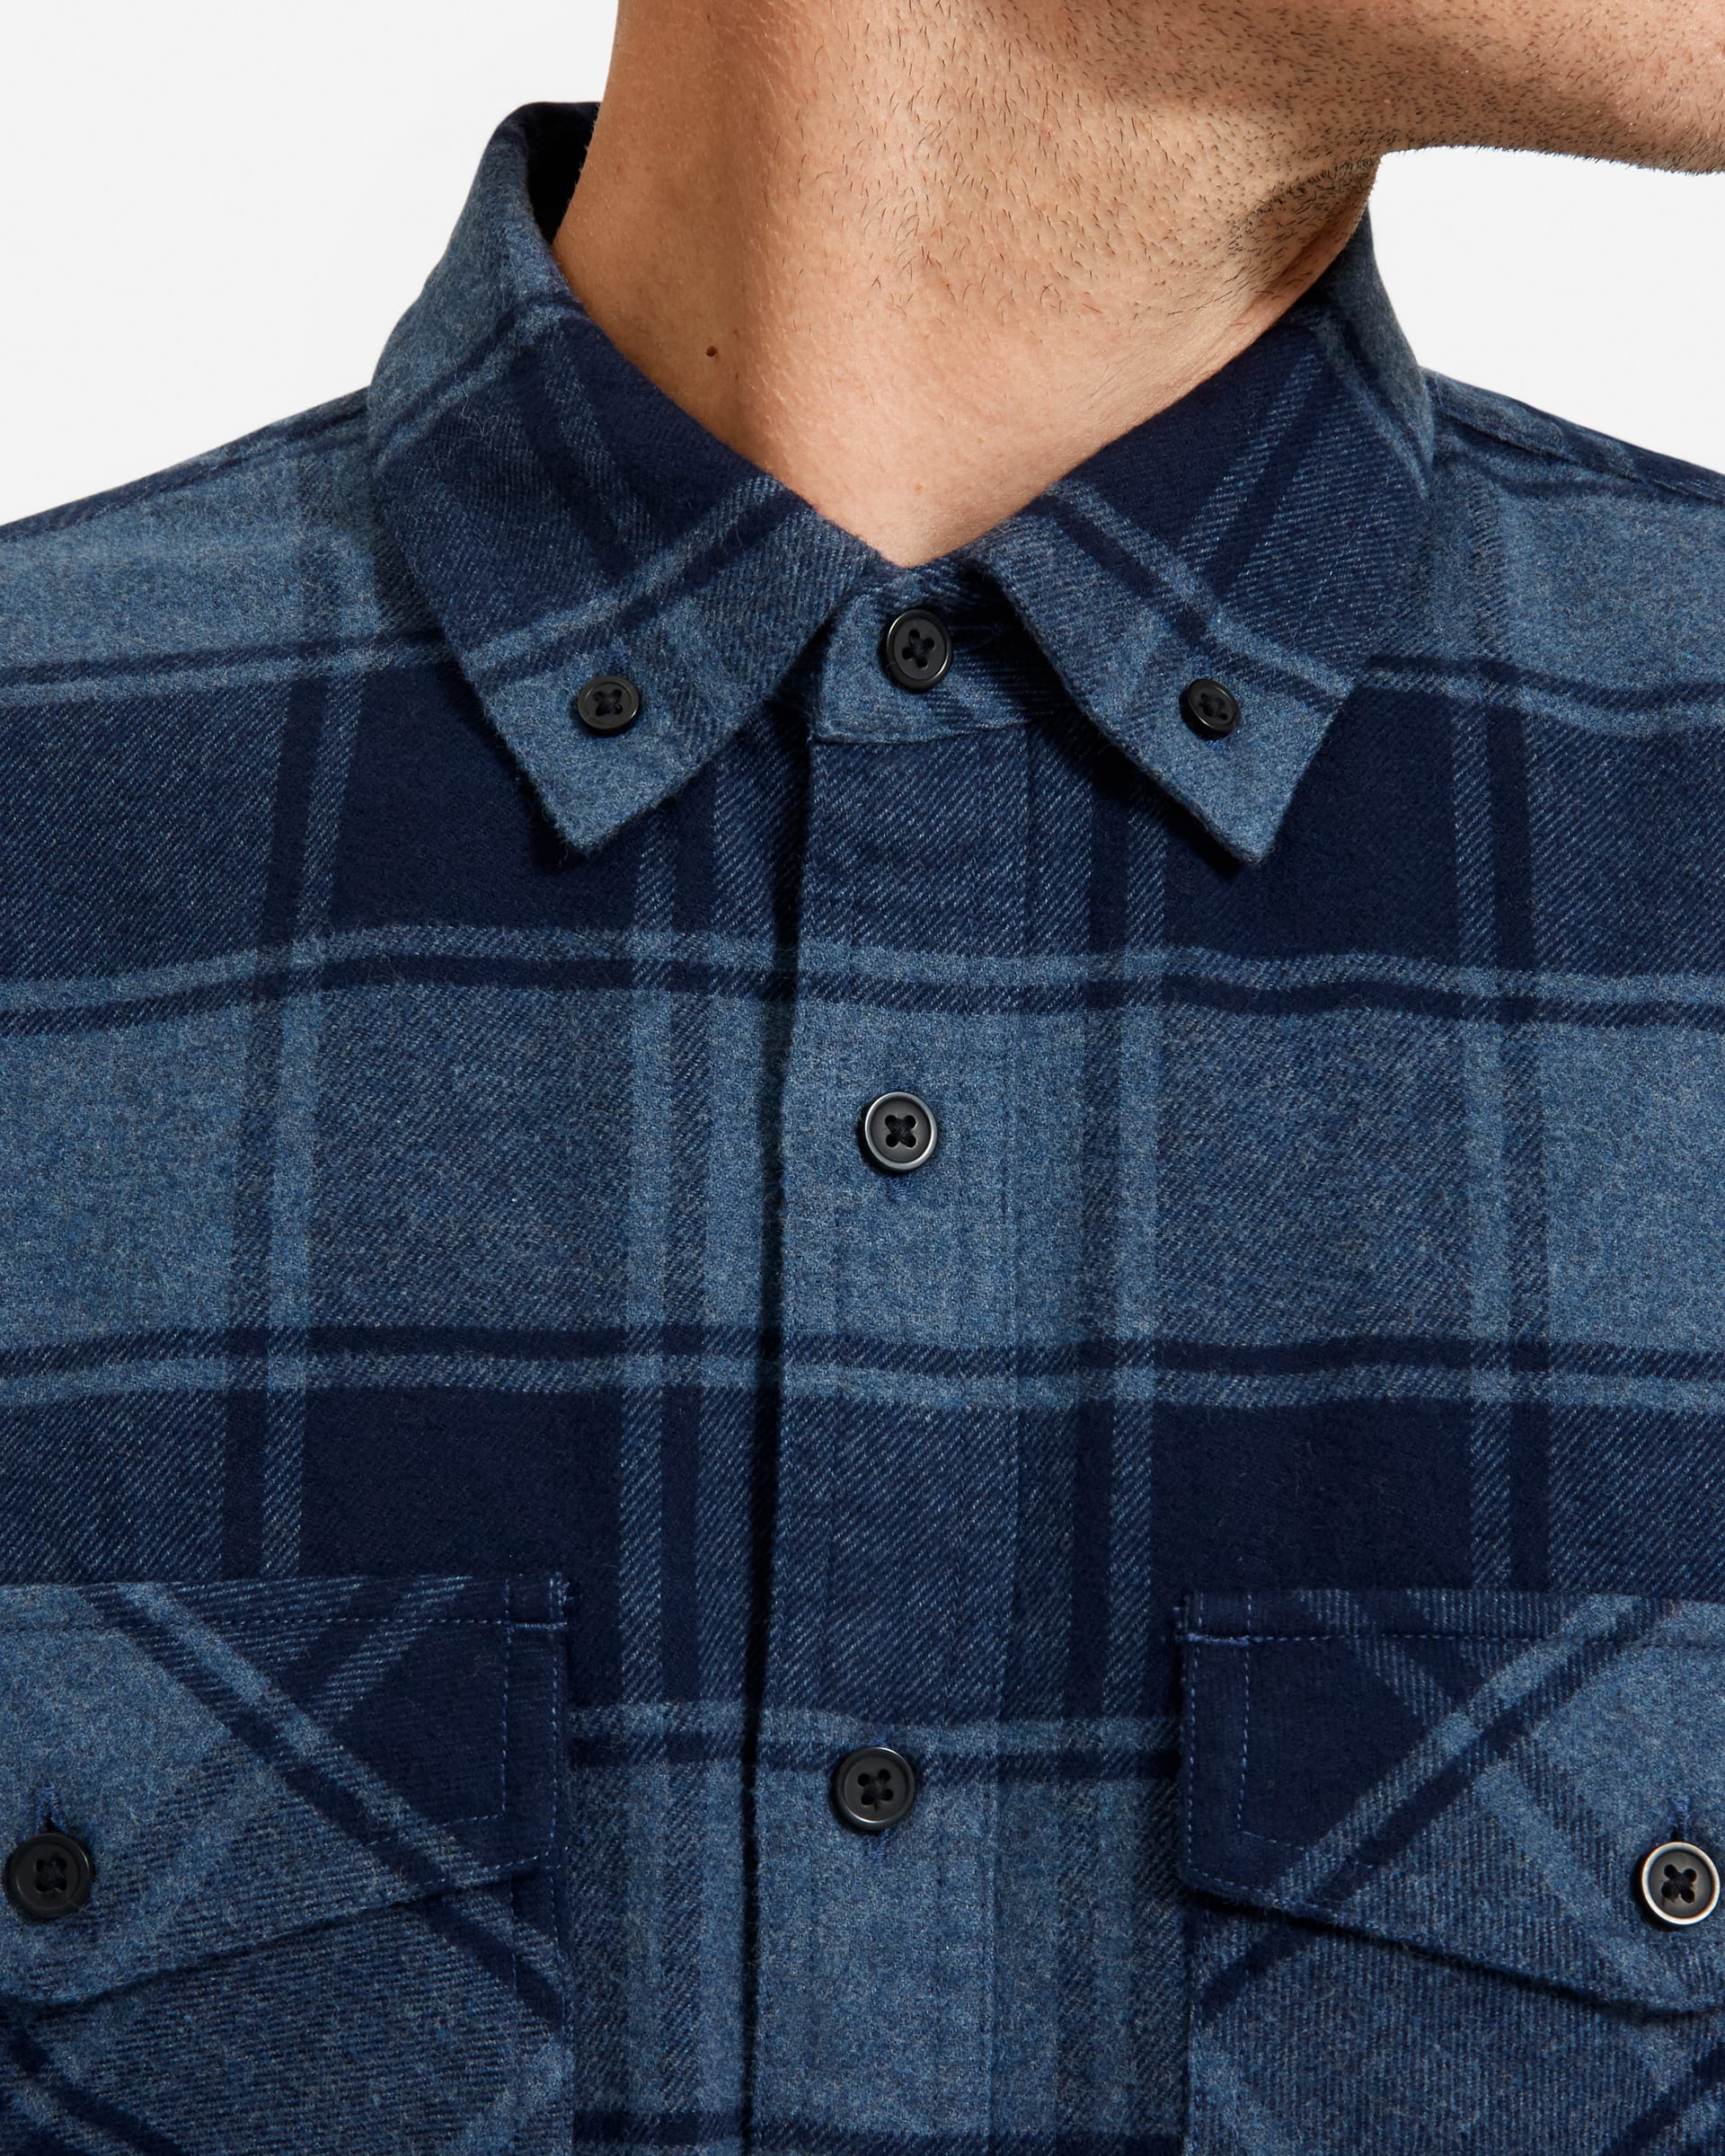 The Brushed Flannel Shirt Heather Blue Plaid – Everlane